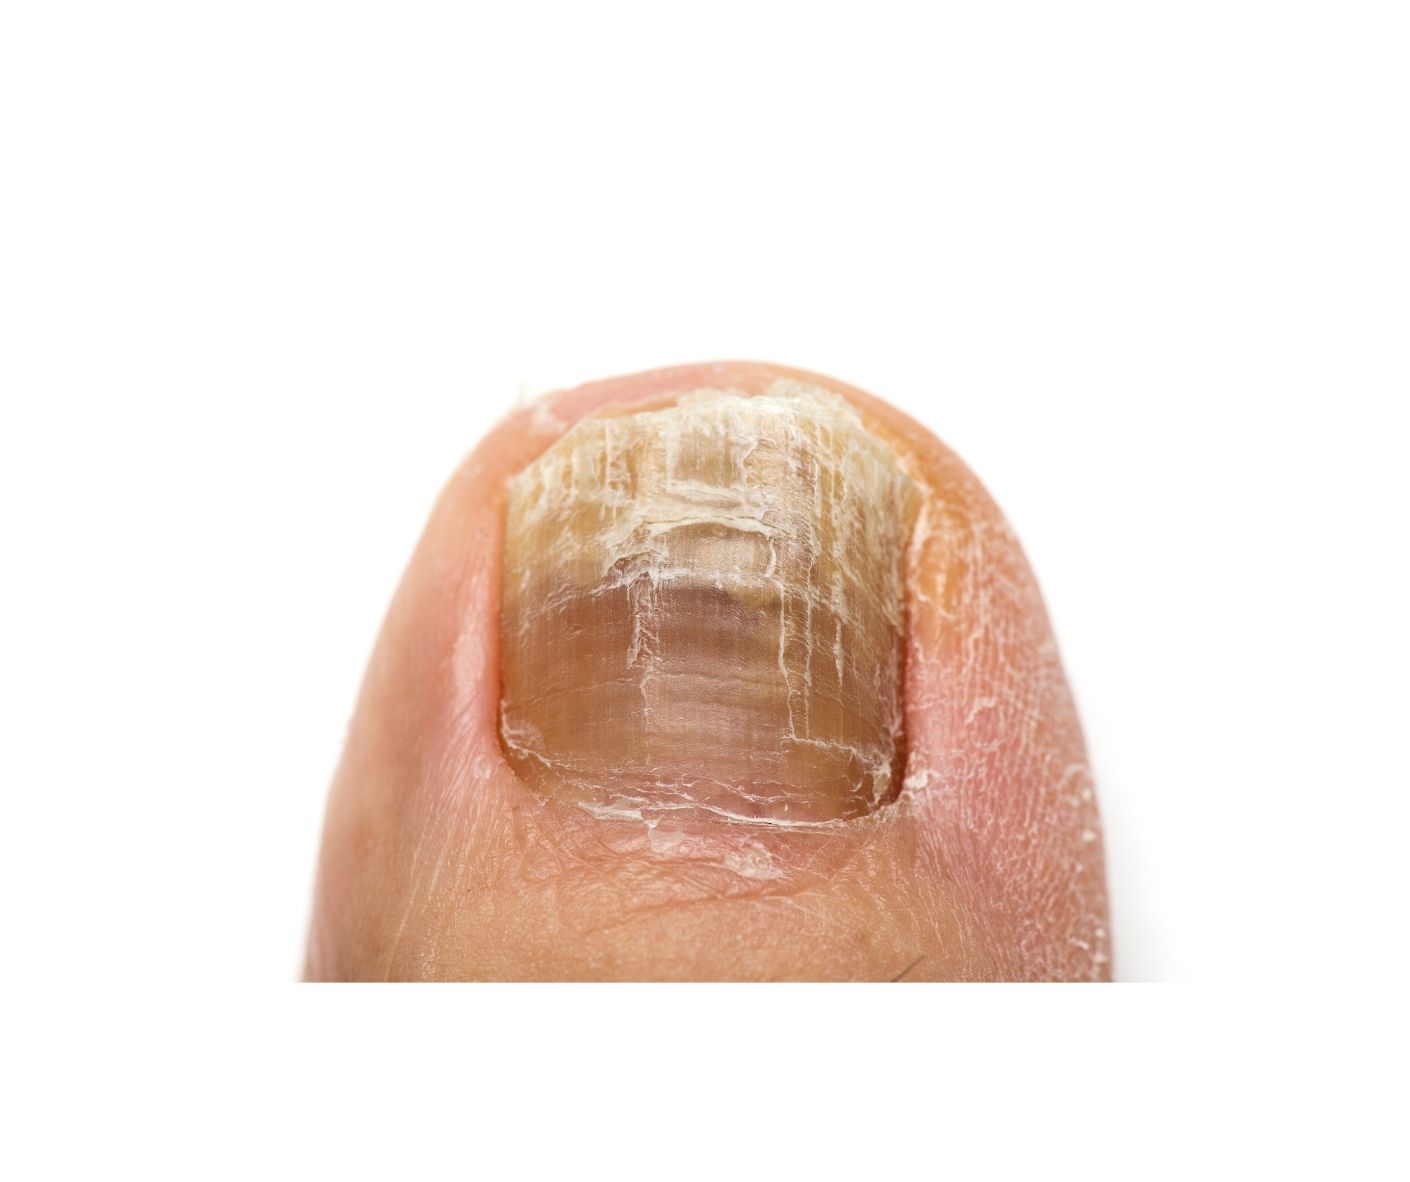 Thickened toenails can be treated by a podiatrist at The House Clinics, Bristol